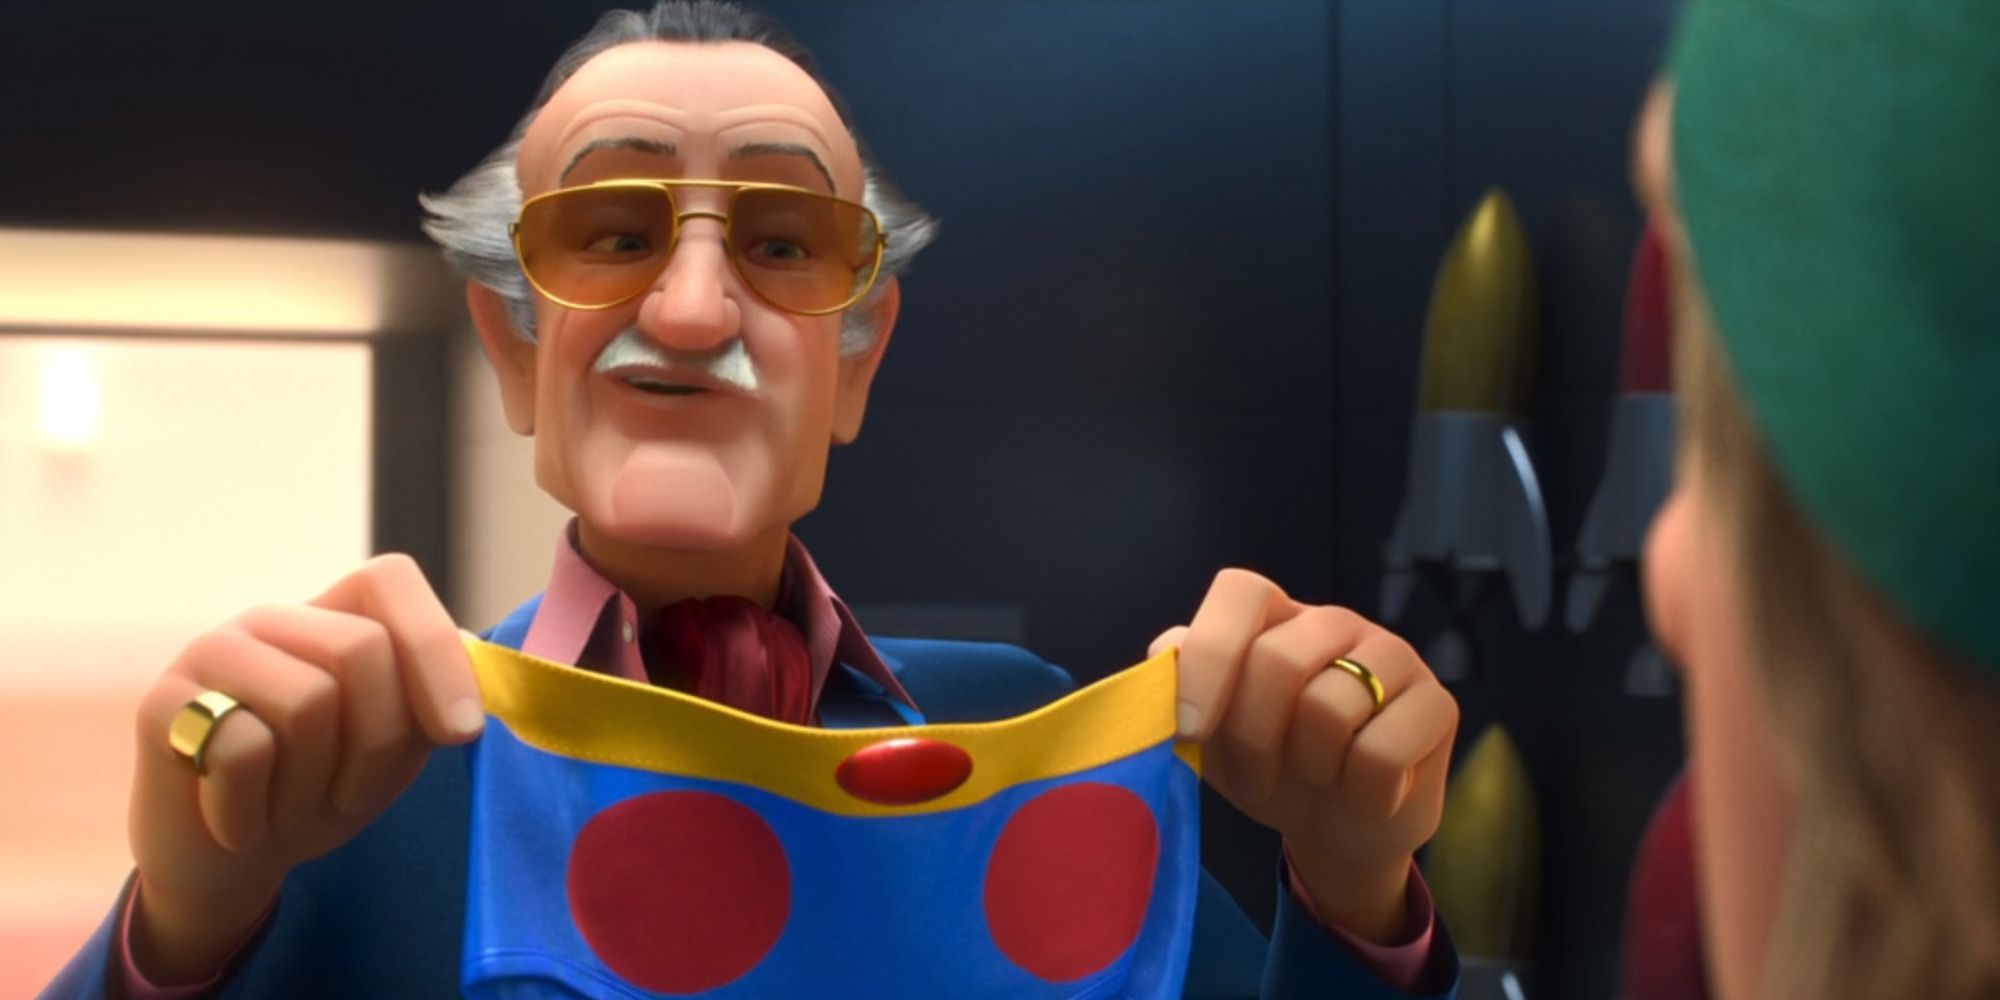 Fred reuniting with his father played by Stan Lee in Big Hero 6